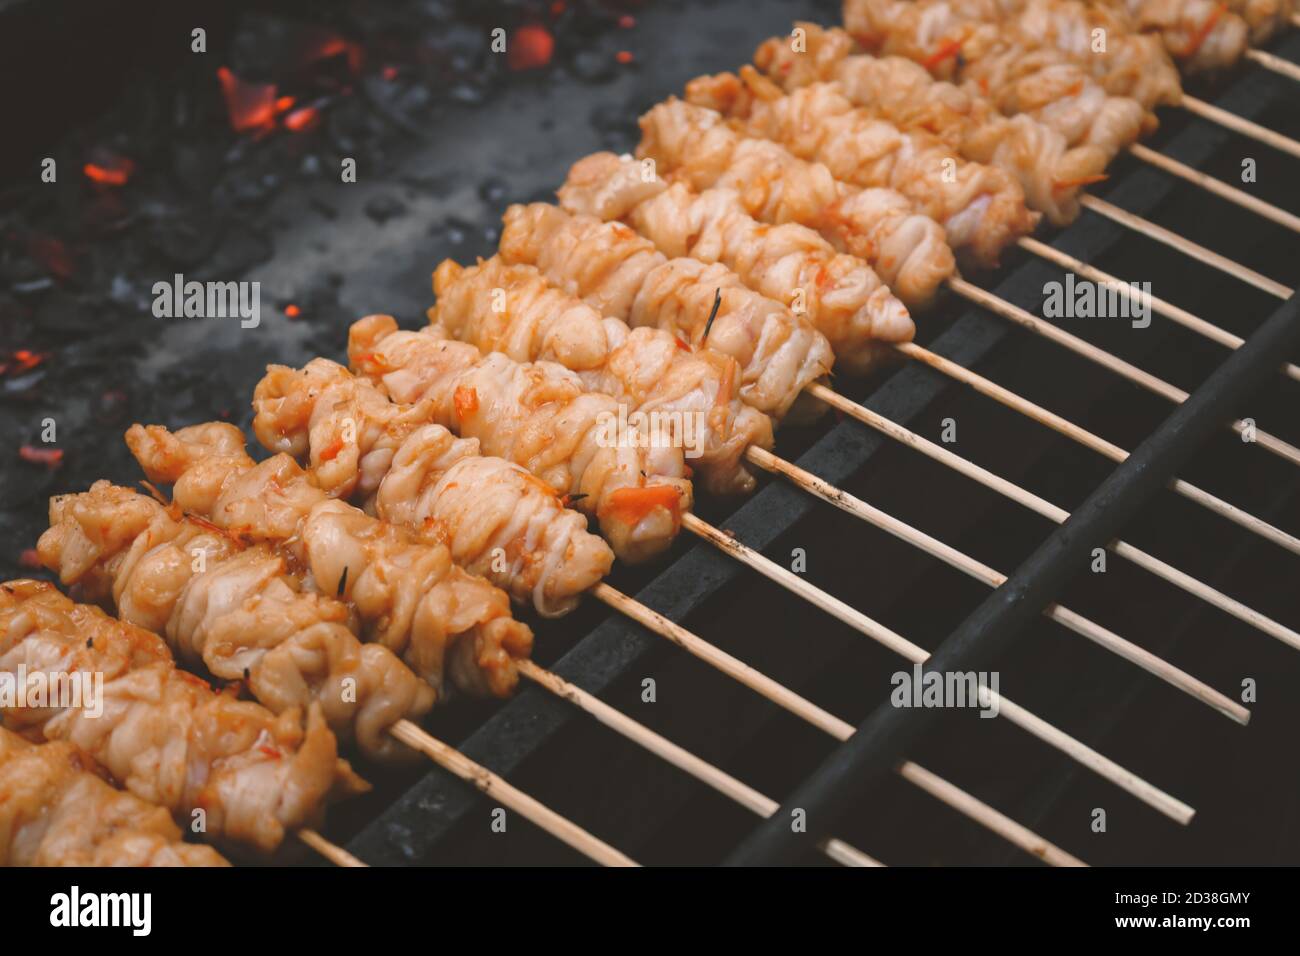 Chicken Satay or Chicken skin satay is grilled chicken skewers marinated with spices and red chili sauce Stock Photo